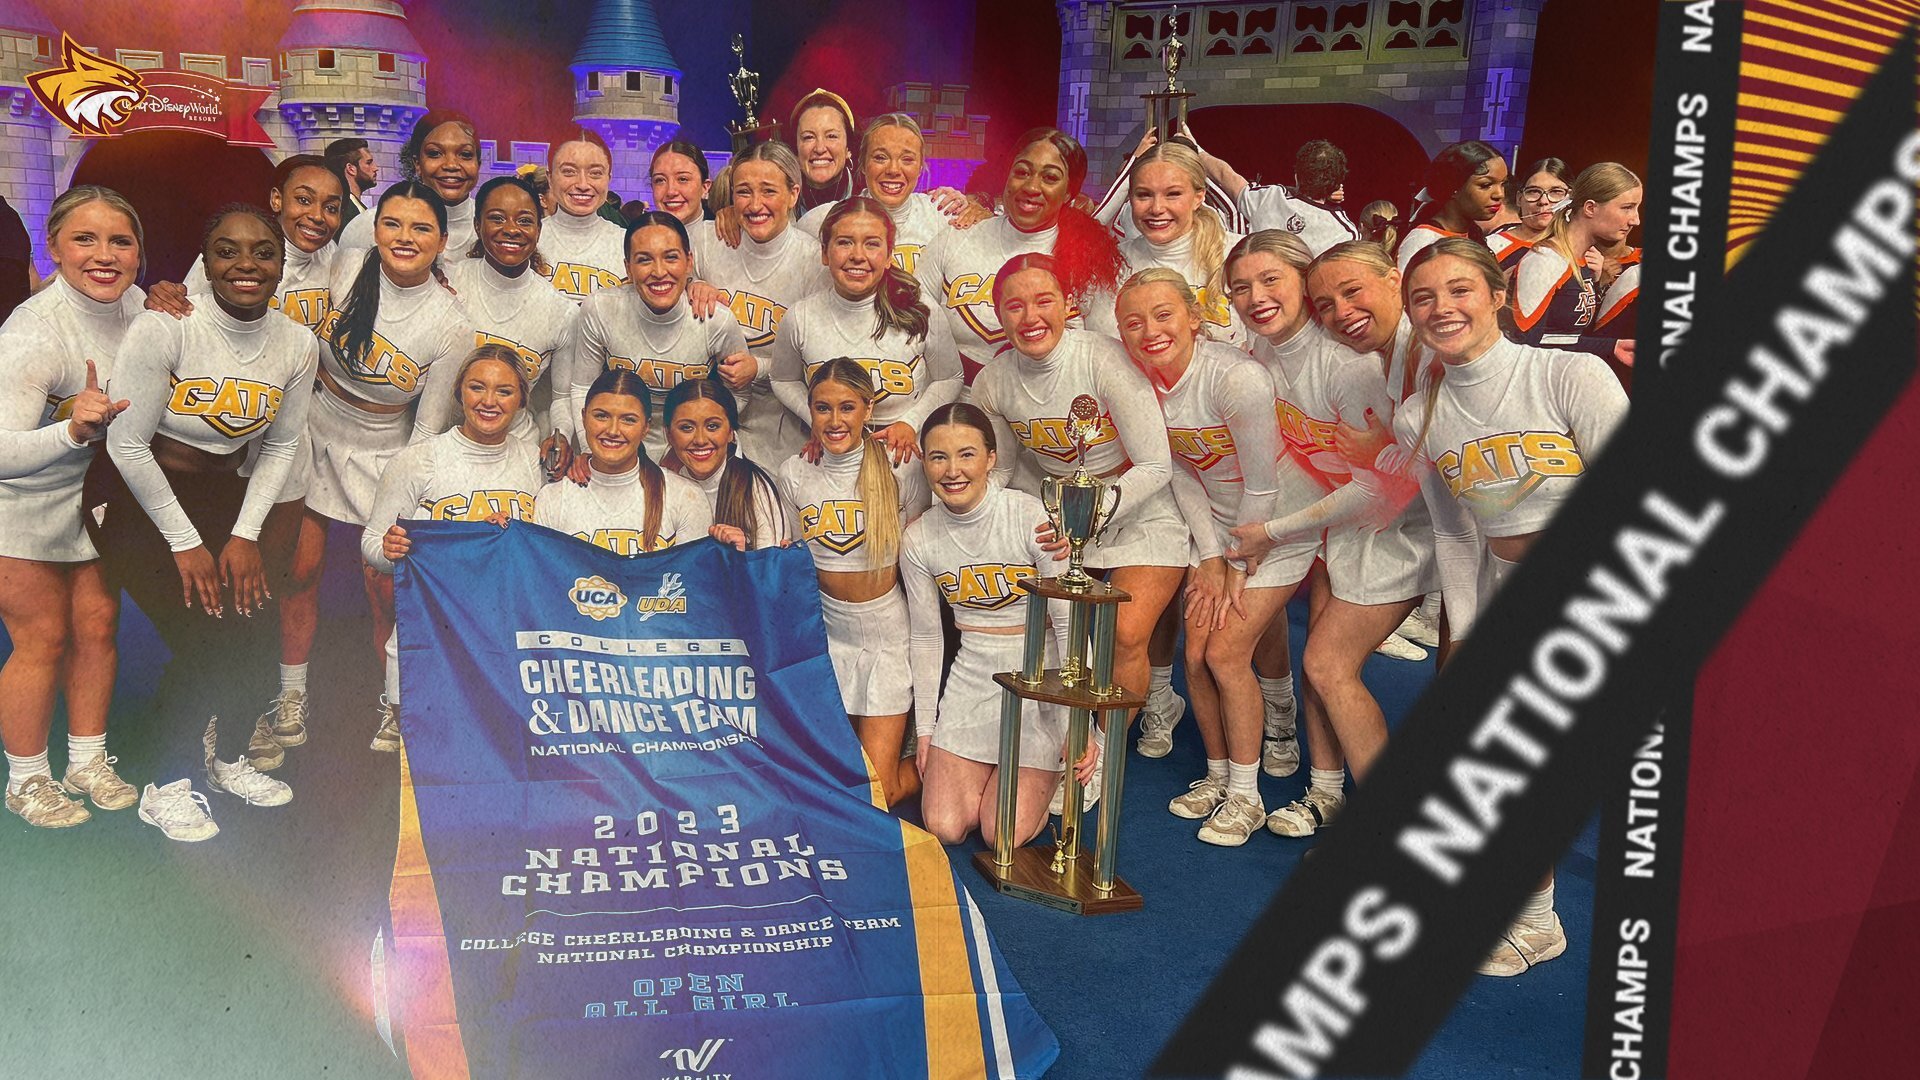 Pearl River cheer claims back-to-back UCA National Championships